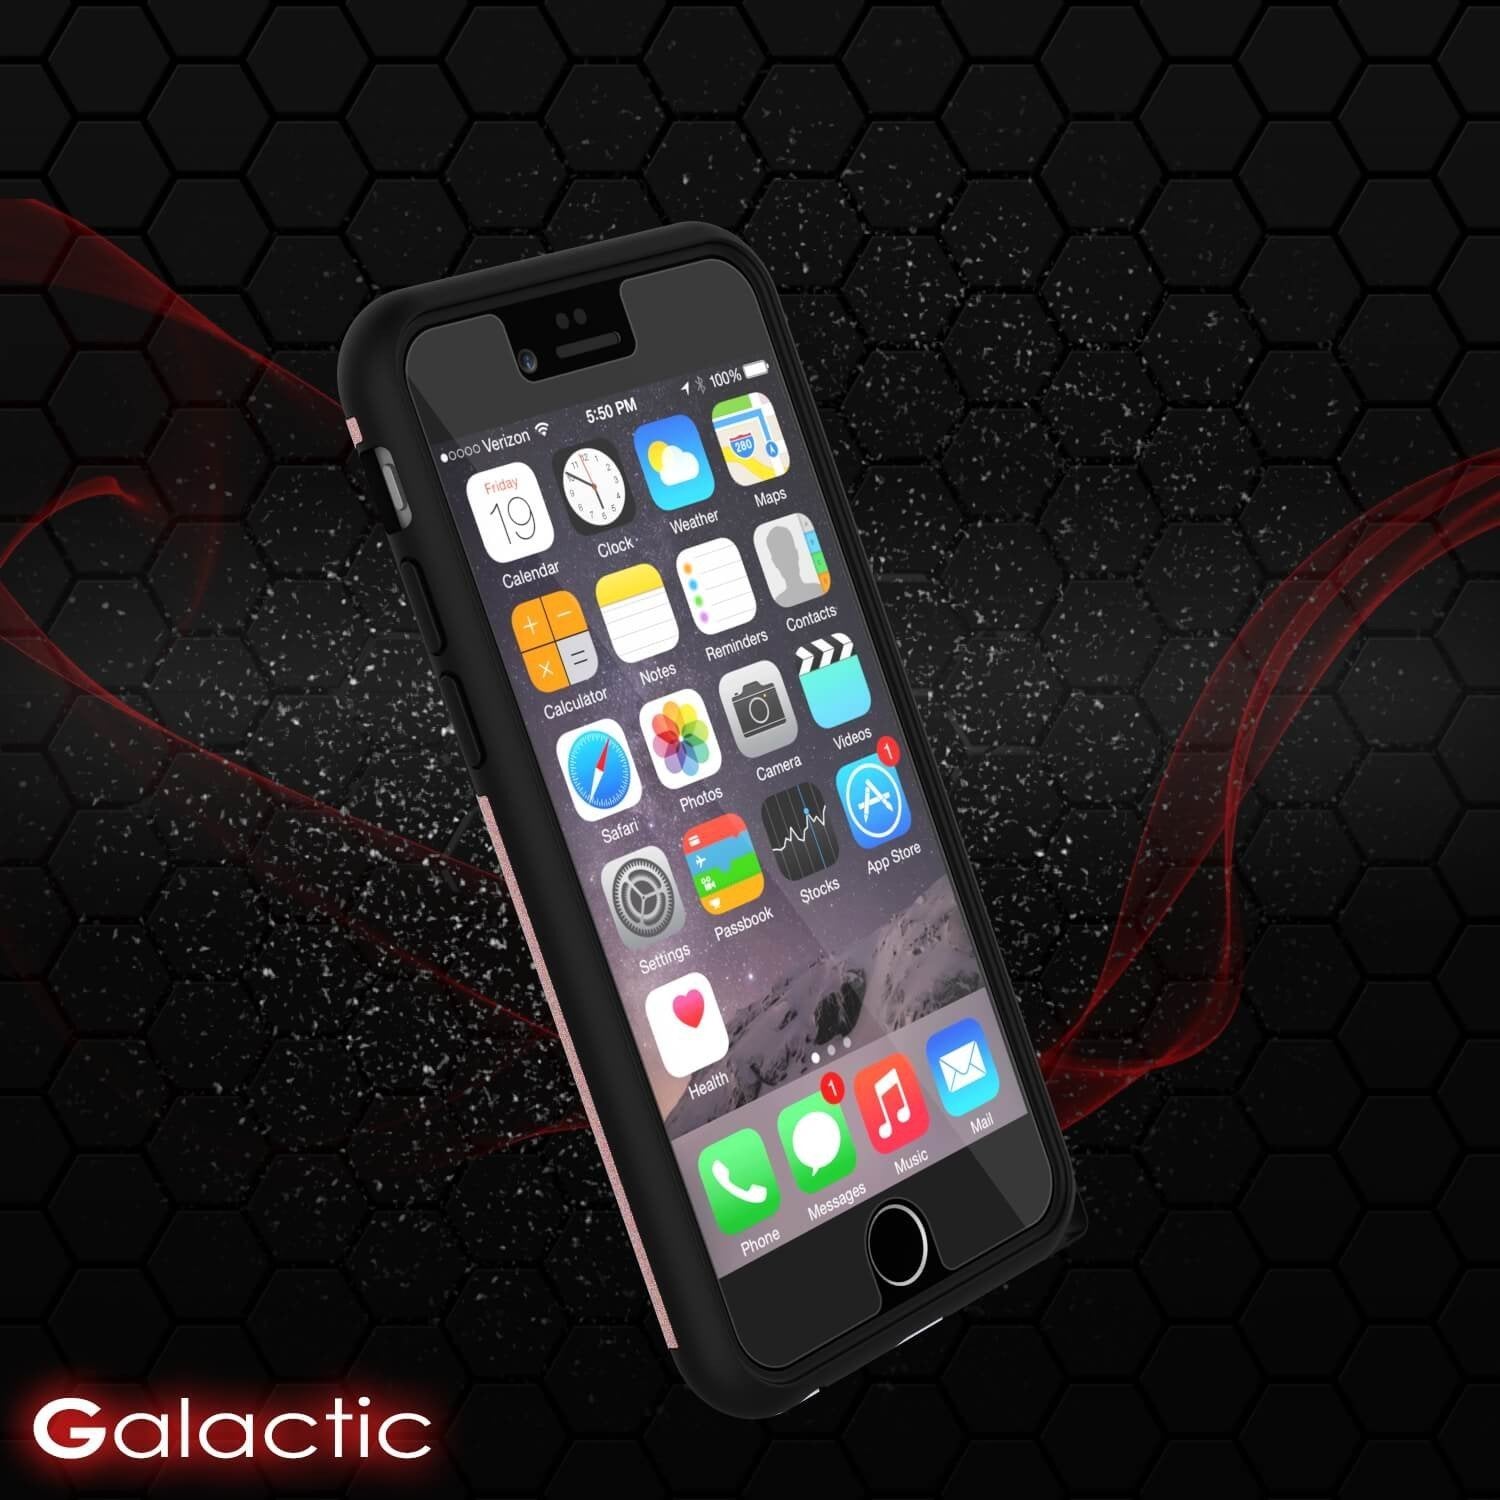 iPhone 5s/5 Case PunkCase Galactic silver Series Slim w/ Tempered Glass | Lifetime Warranty - PunkCase NZ